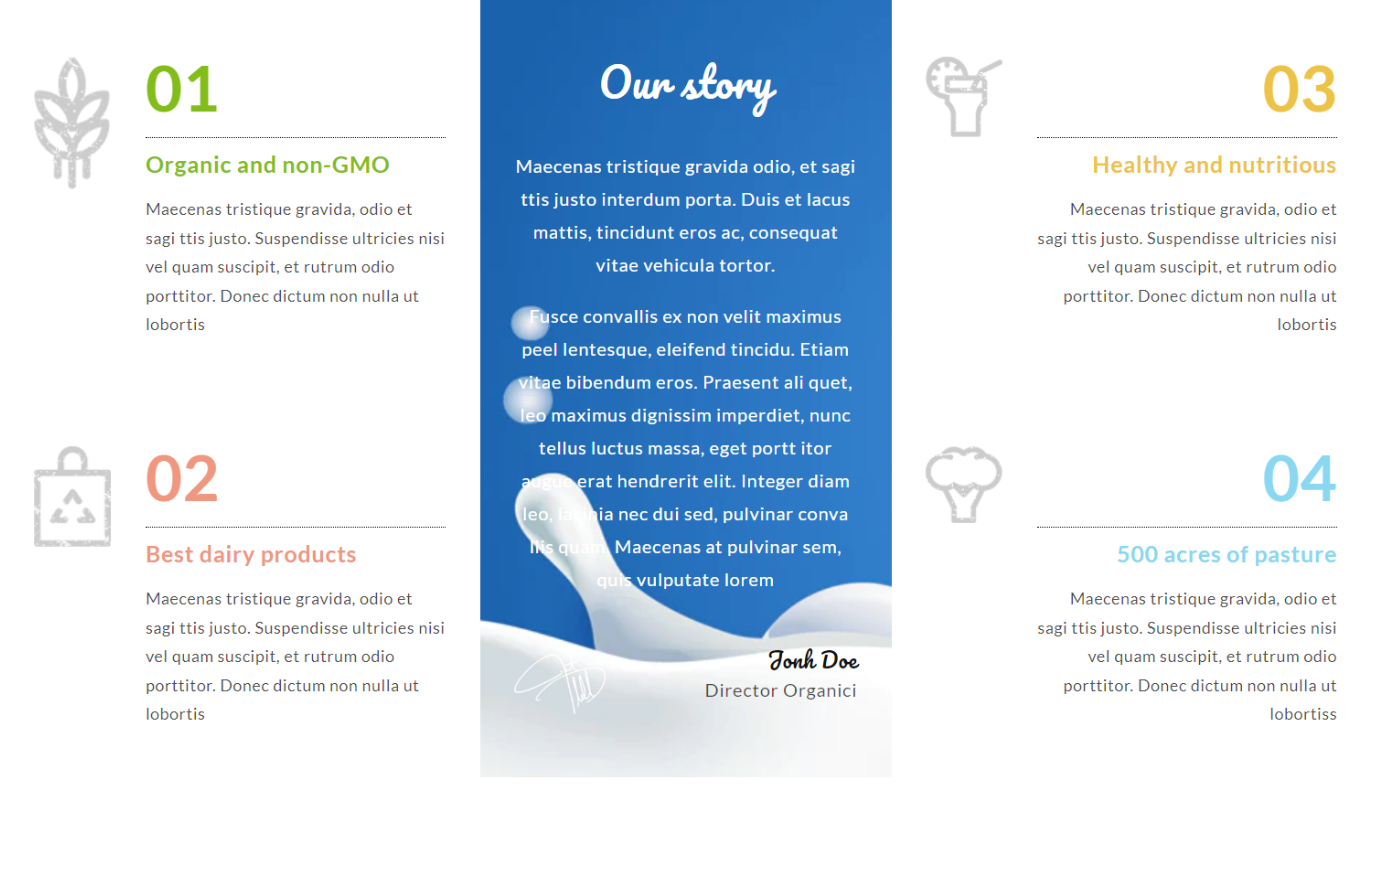 Milkify - Milk Store Shopify template built by Pagefly